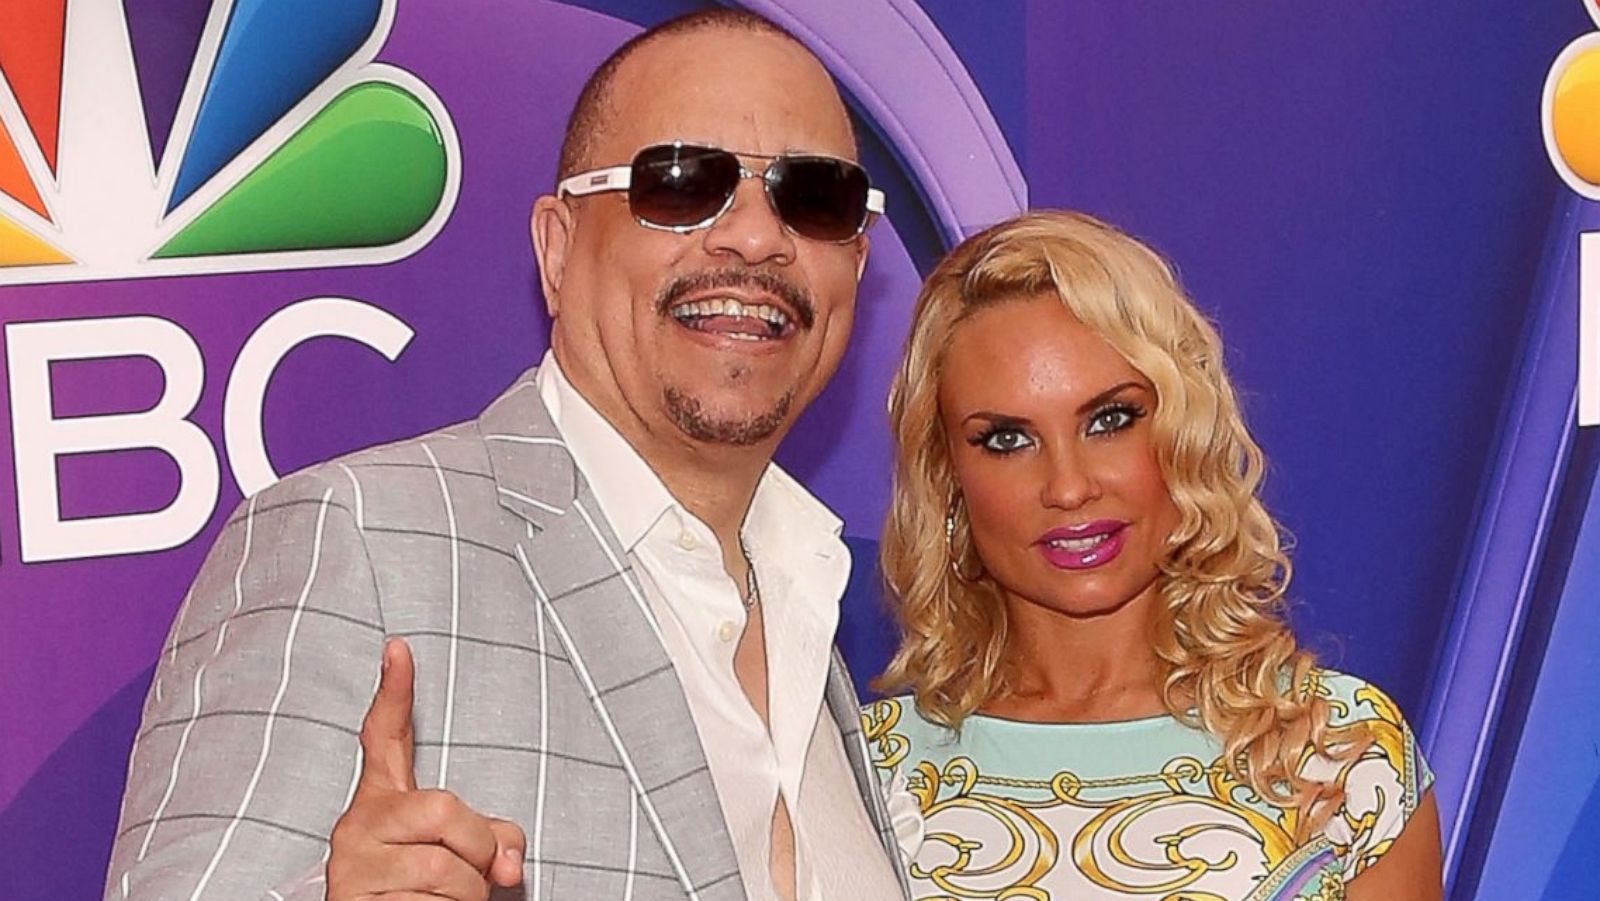 Rapper Ice T and Wife Coco Expecting First Child Together pic